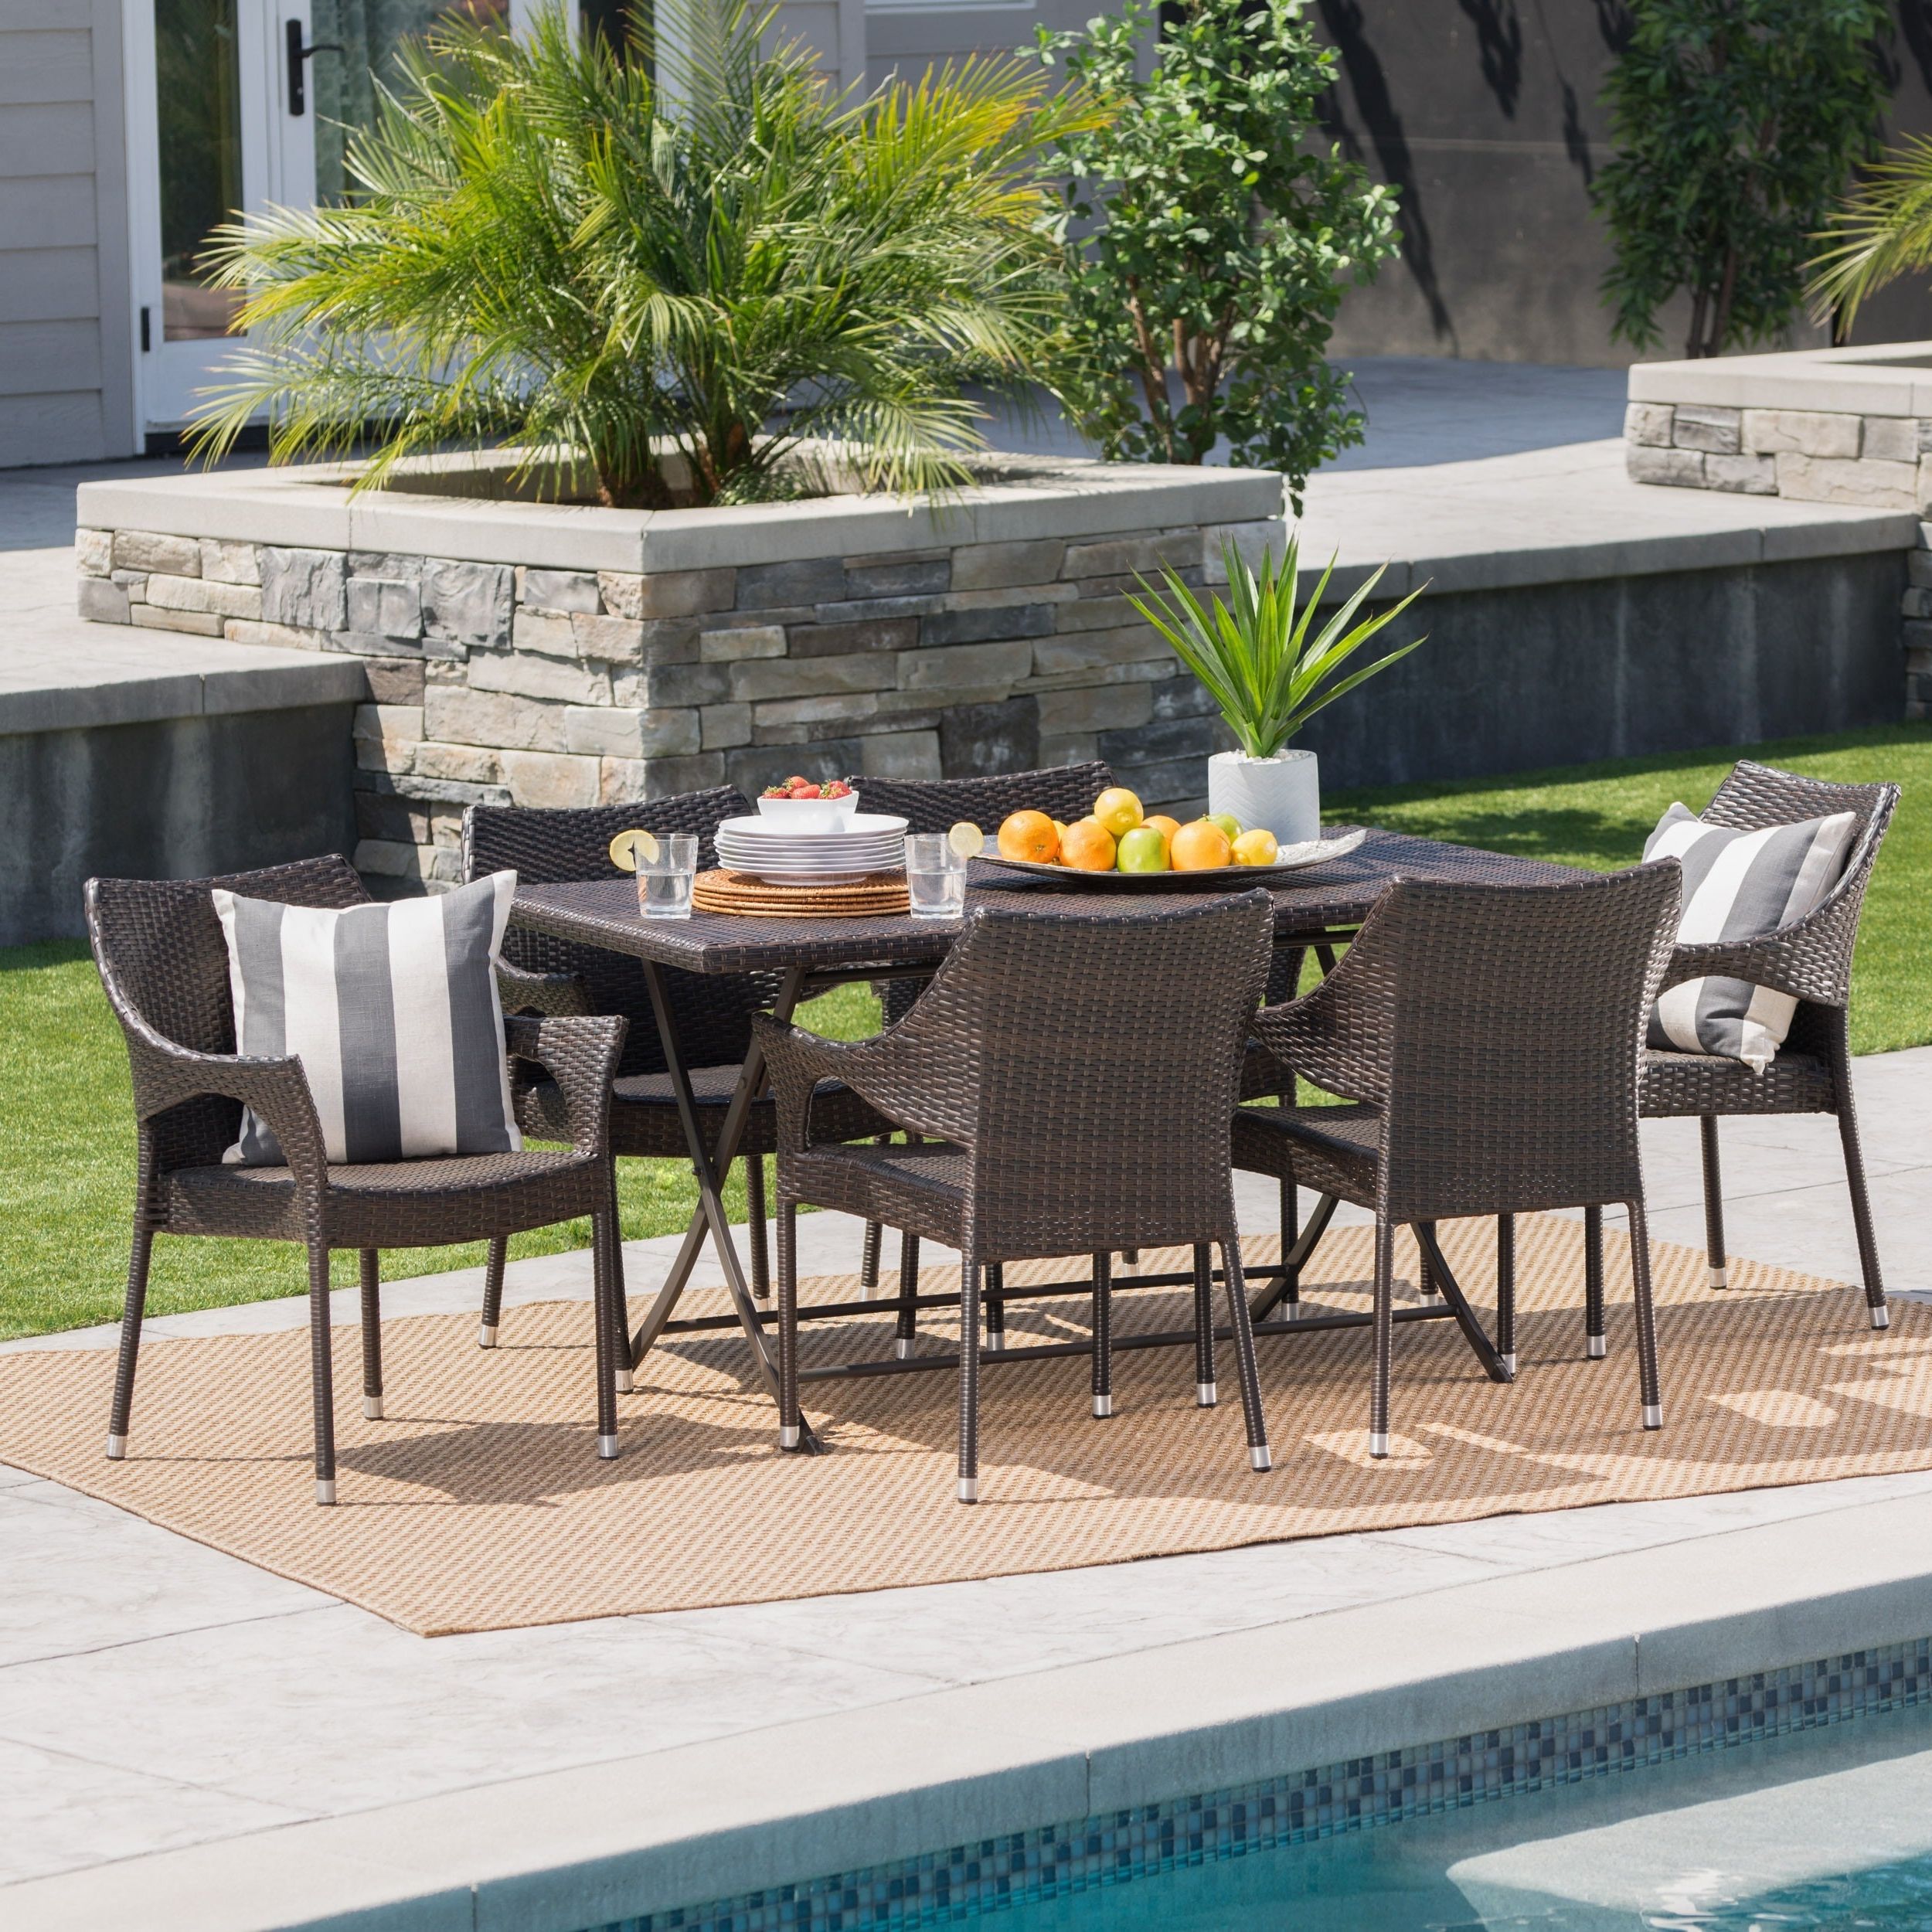 Preferred Christopher Knight Home Darcy Outdoor 7 Piece Rectangle Foldable Wicker In Large Rectangular Patio Dining Sets (View 1 of 15)